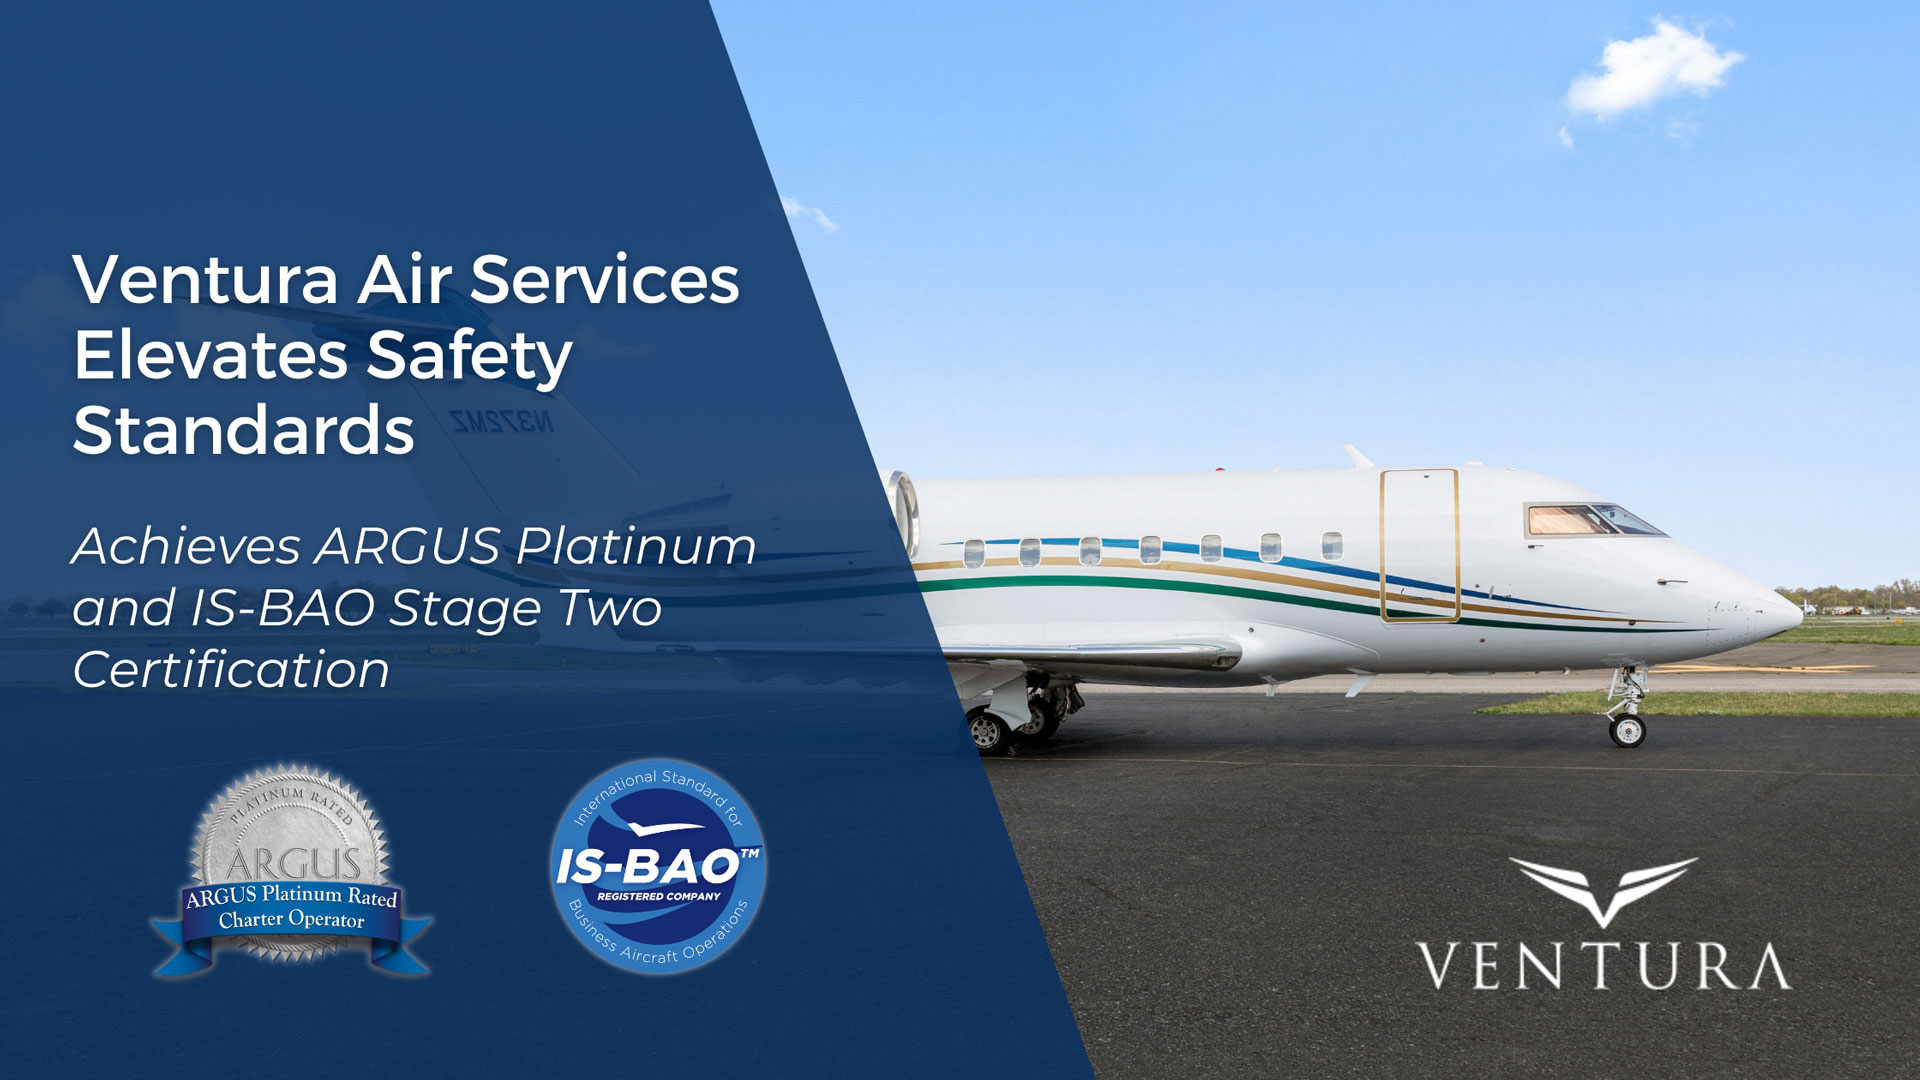 Press Release - Safety Standards with ARGUS Platinum